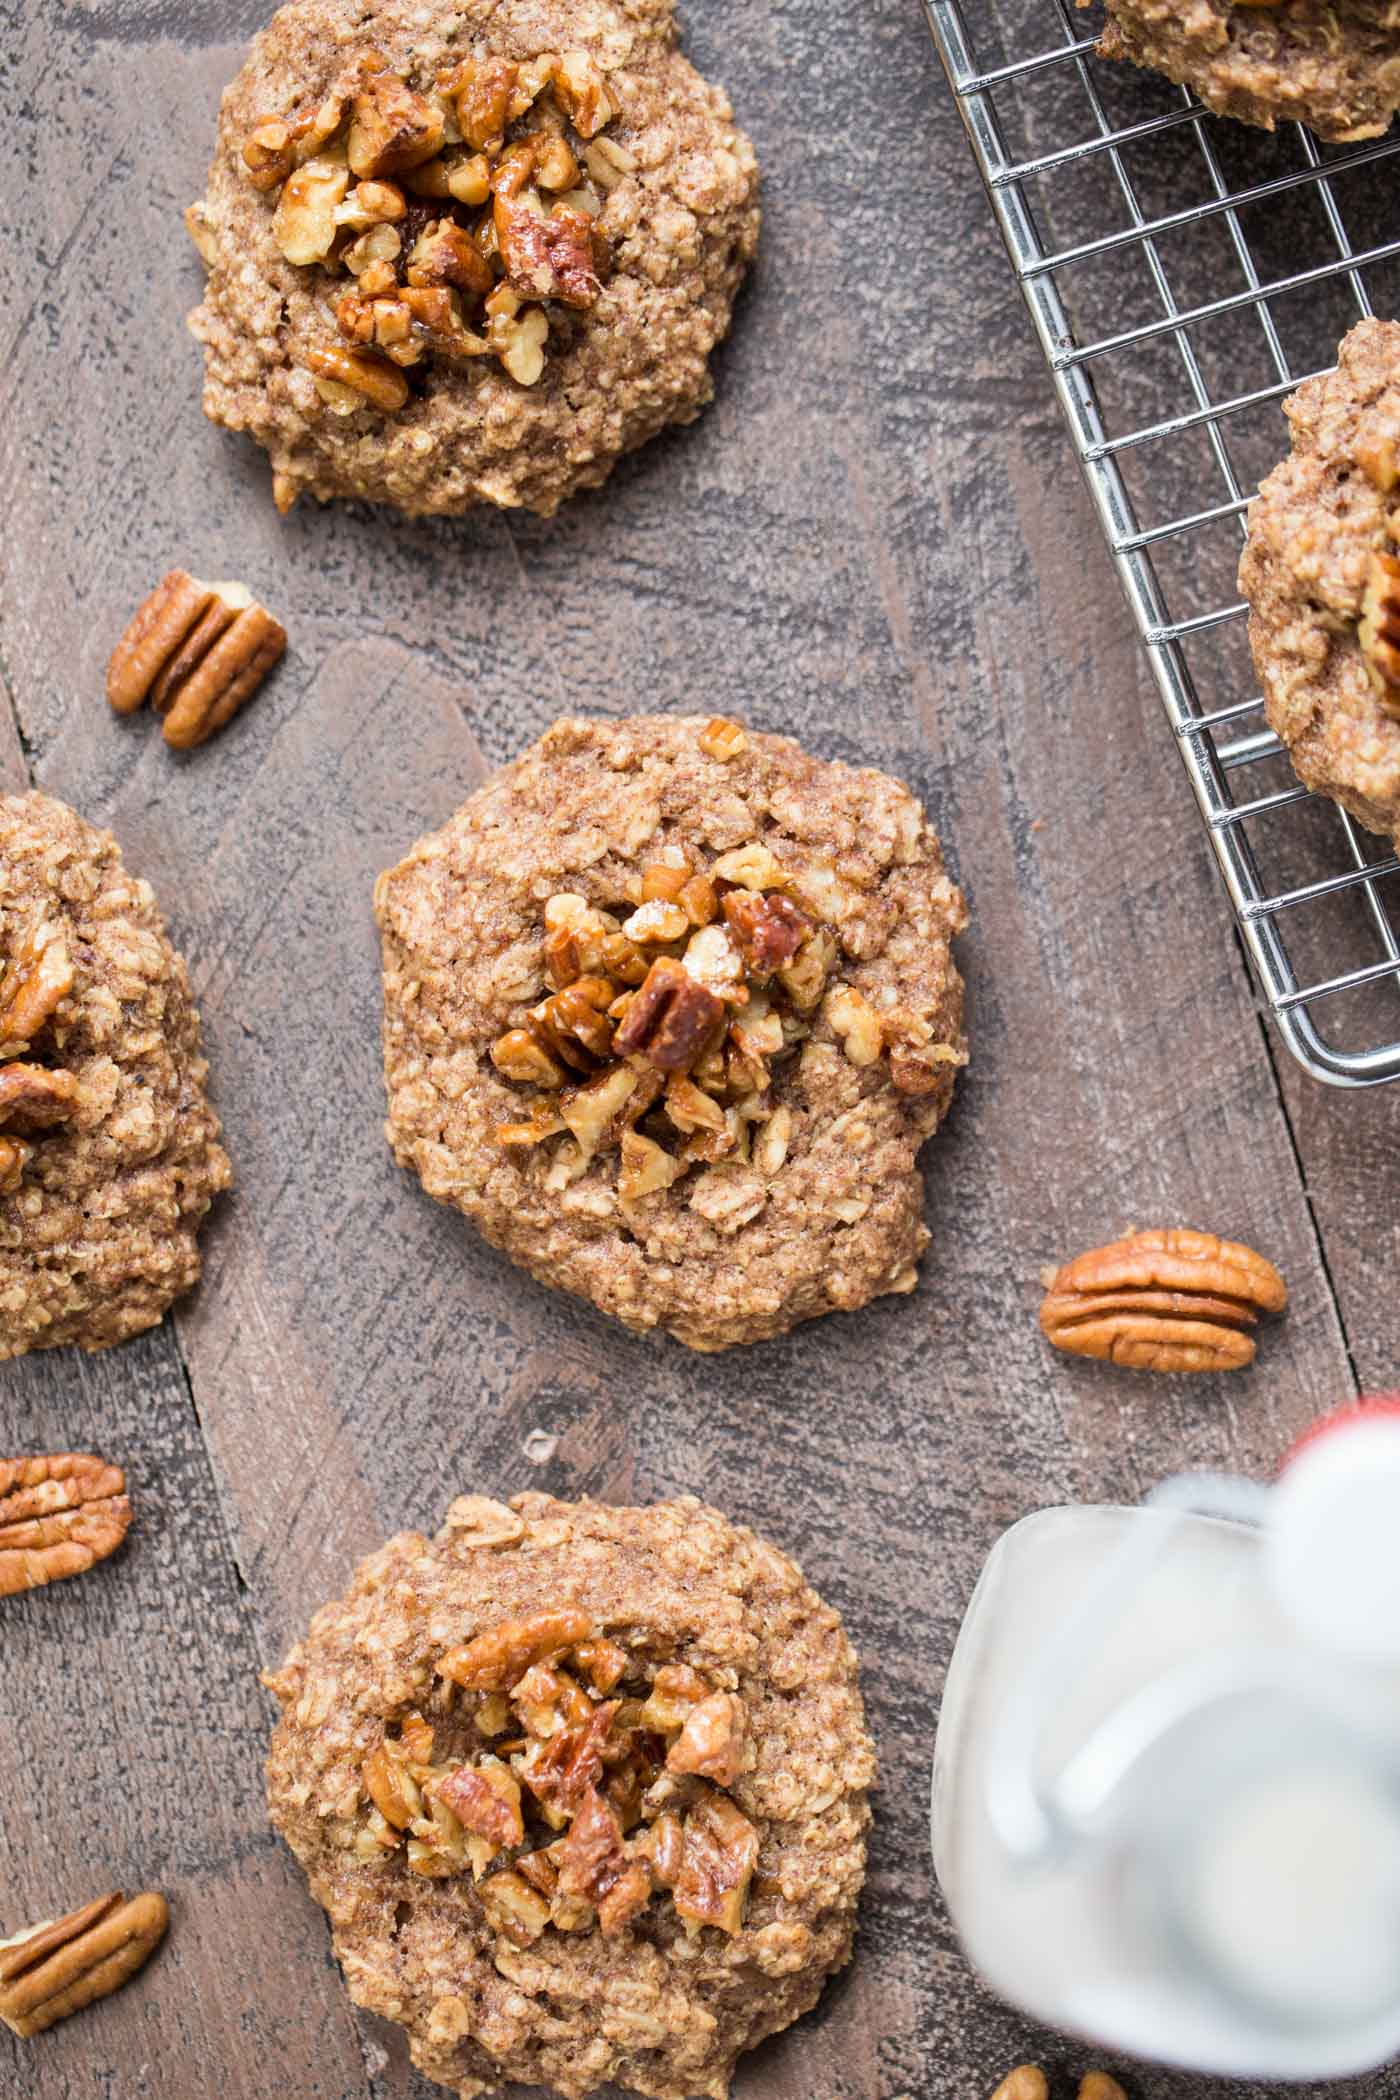 Epic QUINOA BREAKFAST COOKIES that taste like pecan pie but are 100% good for you!